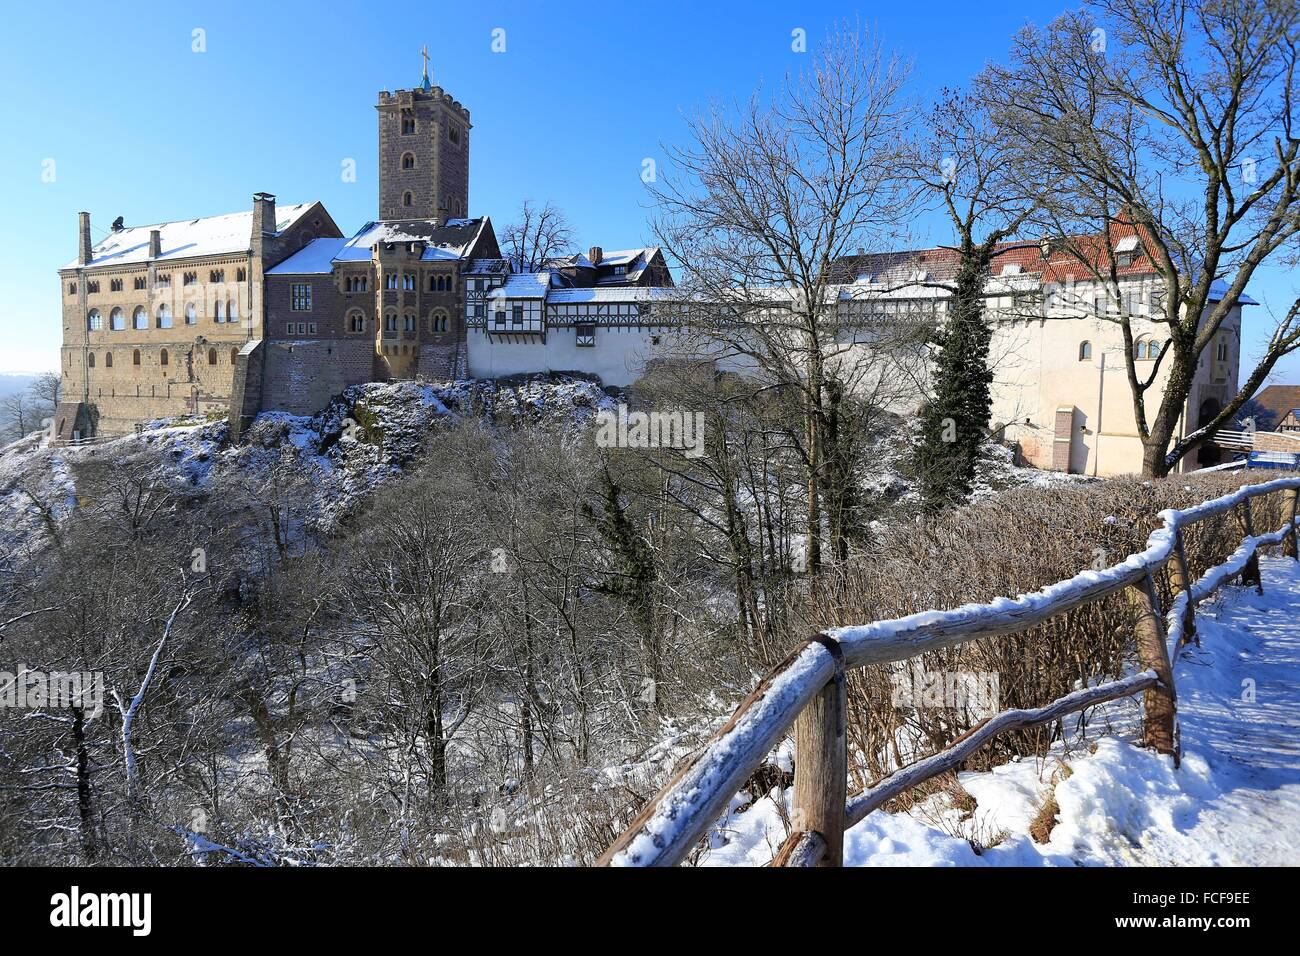 The Wartburg in Eisenach was founded around 1067. Since 1999 it is a World Heritage Site. The Wartburg became famous through the Thuringian countess Elisabeth and Martin Luther. Date: January 19, 2016 Stock Photo